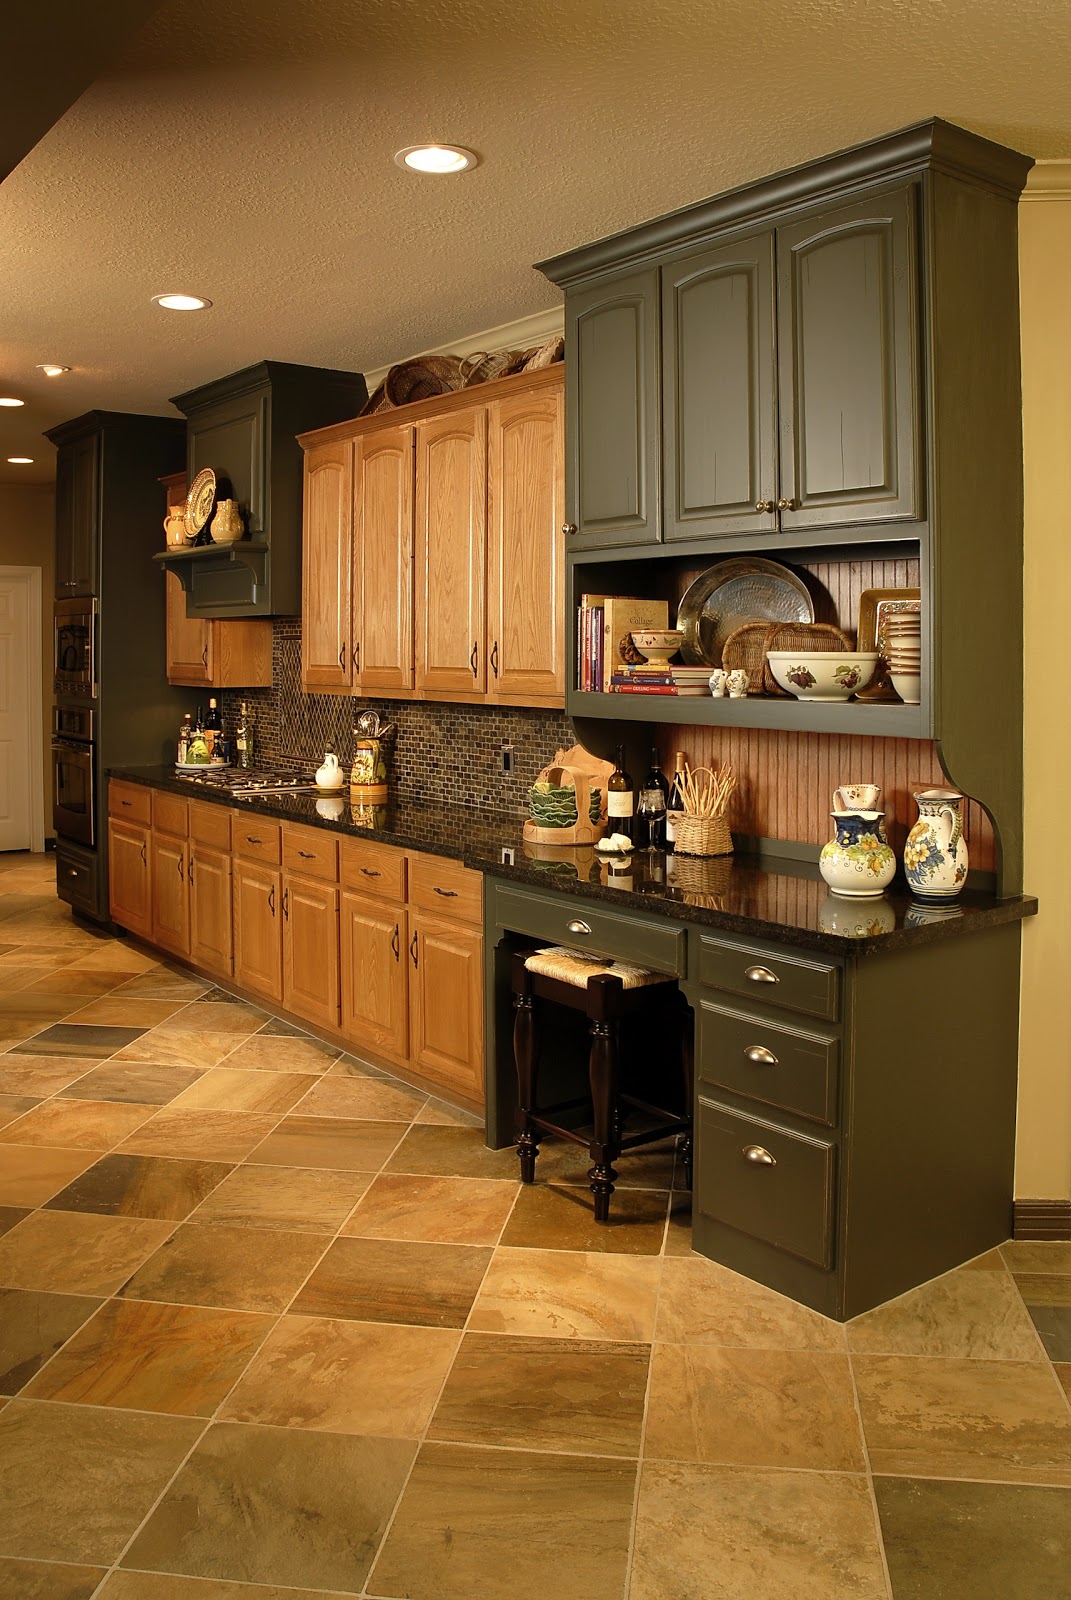 design in wood: What To Do With Oak Cabinets